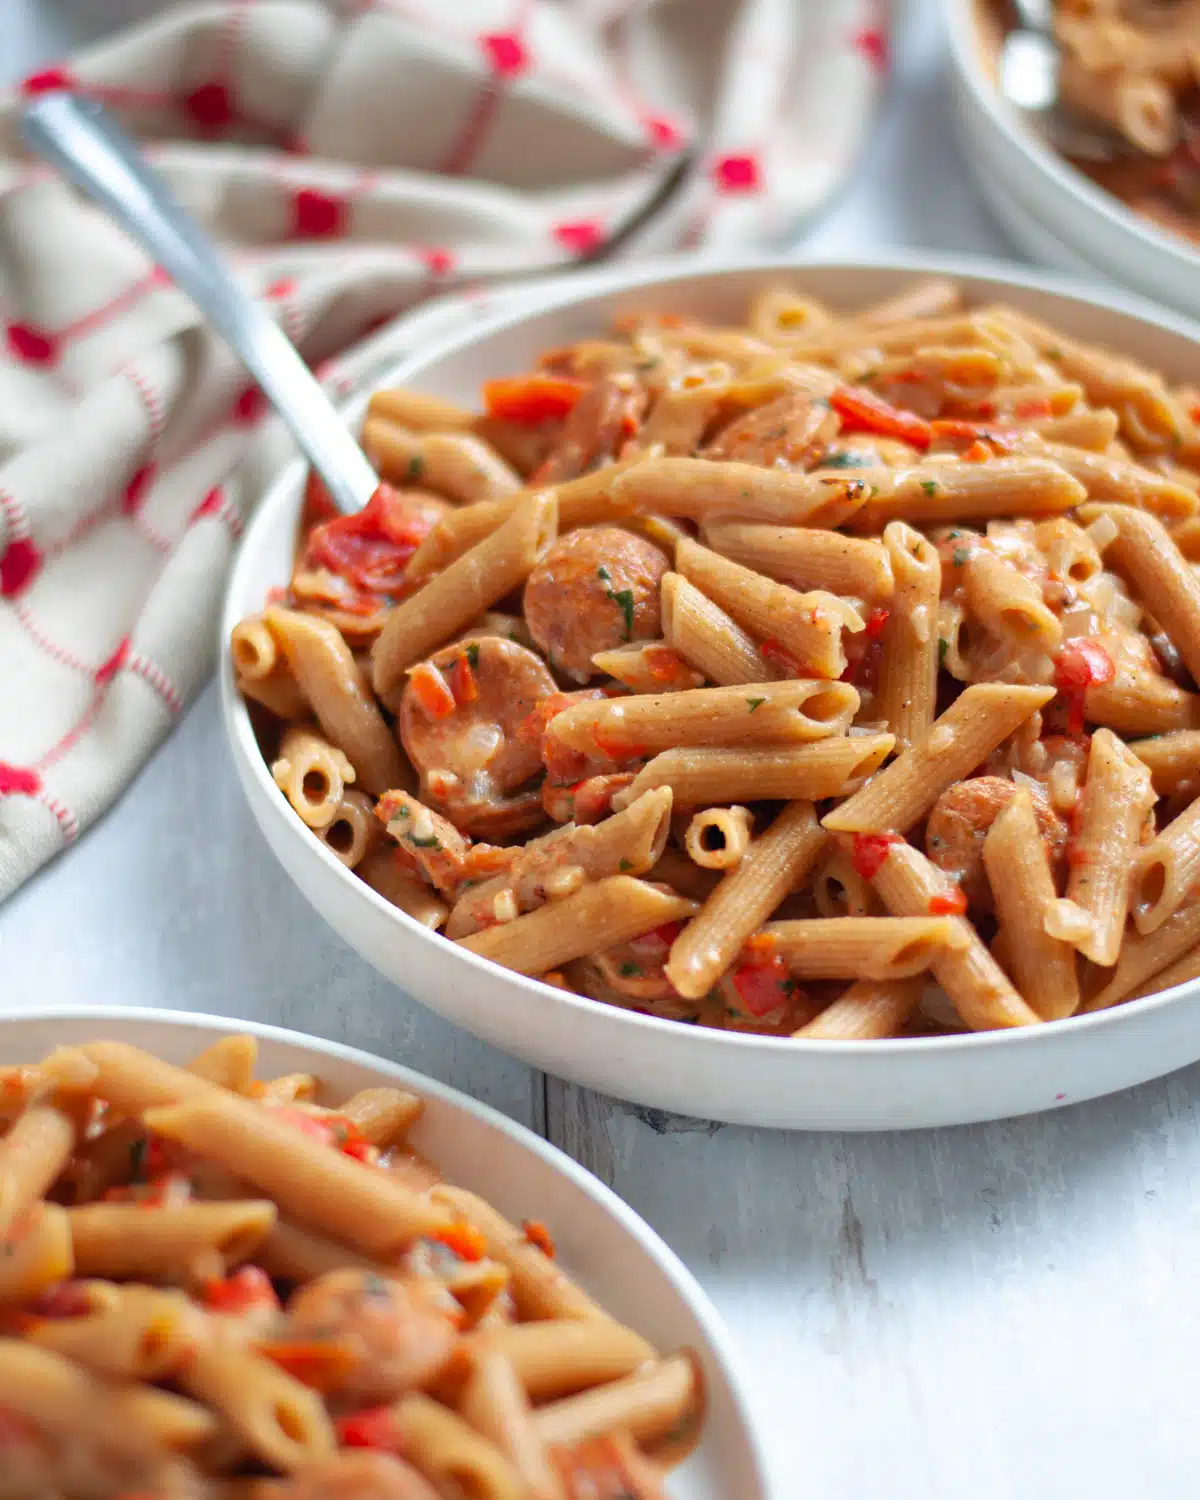 Cajun pasta with sausage for fathers day recipes.